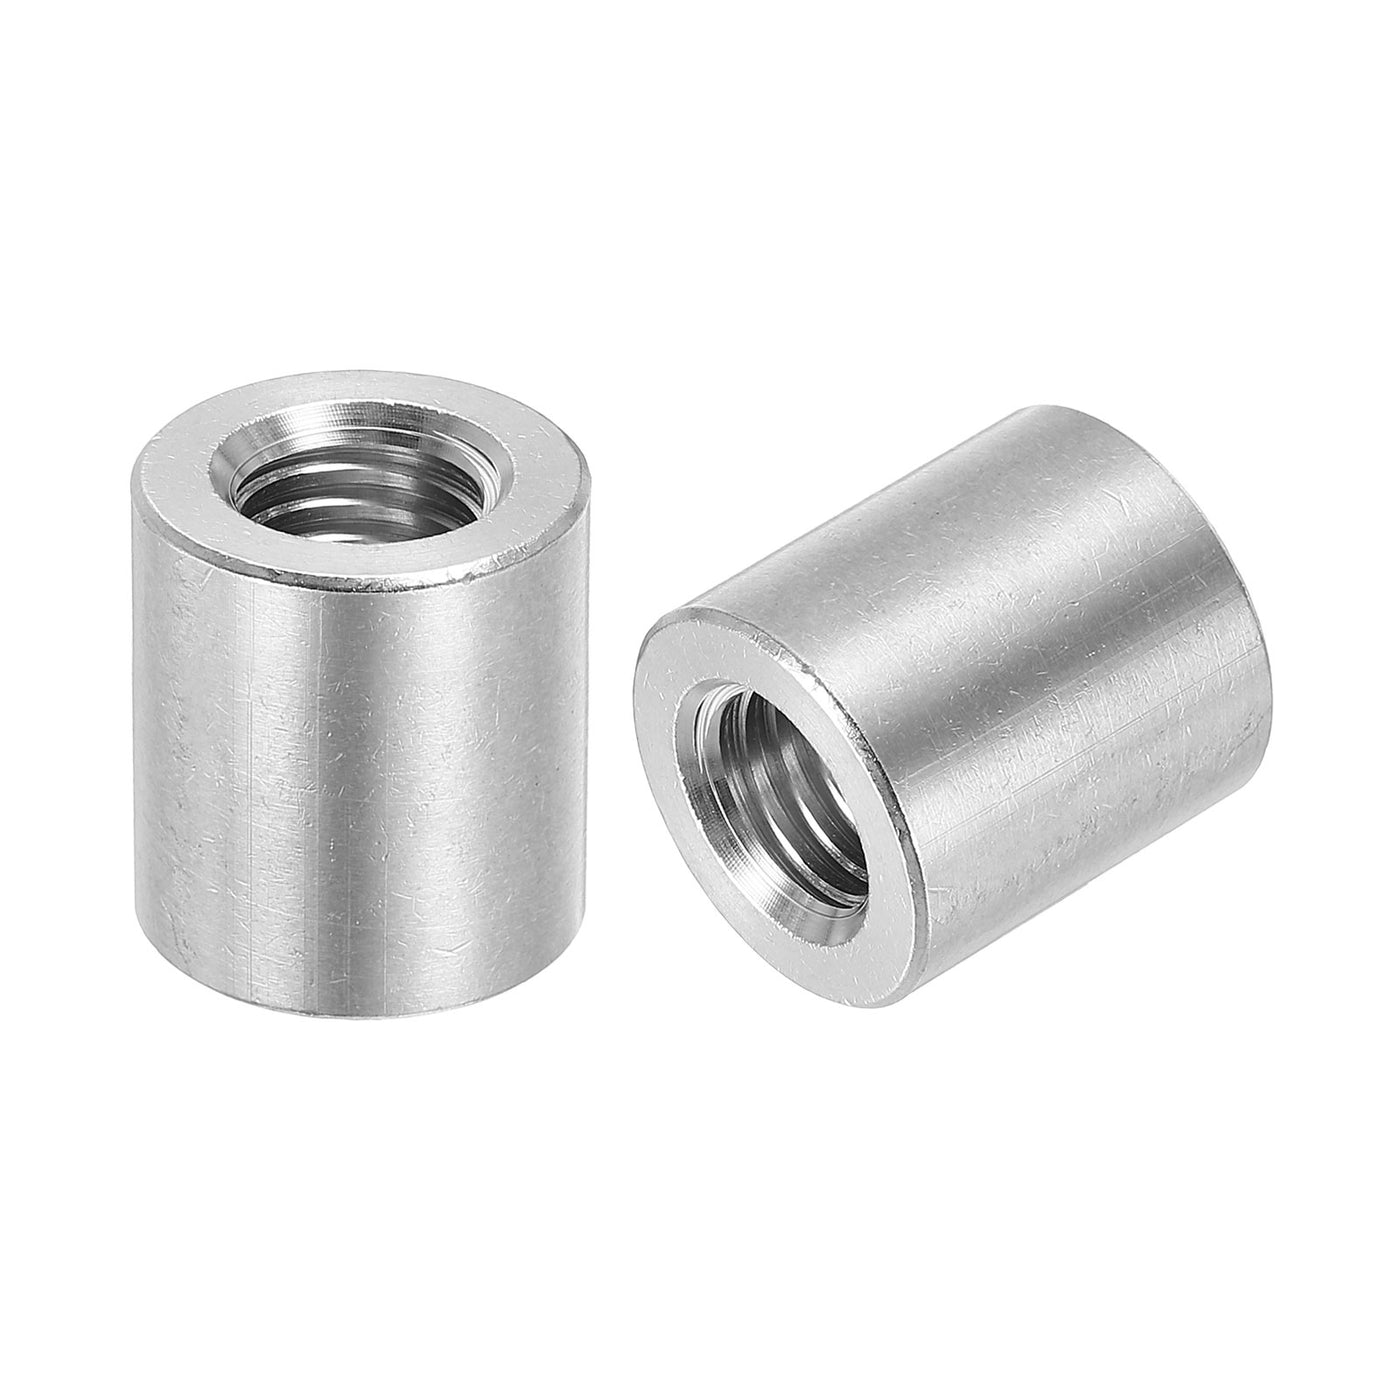 uxcell Uxcell 4Pcs Round Connector Nuts, M12x25x20mm Coupling Nut Sleeve Rod Bar Stud Nut